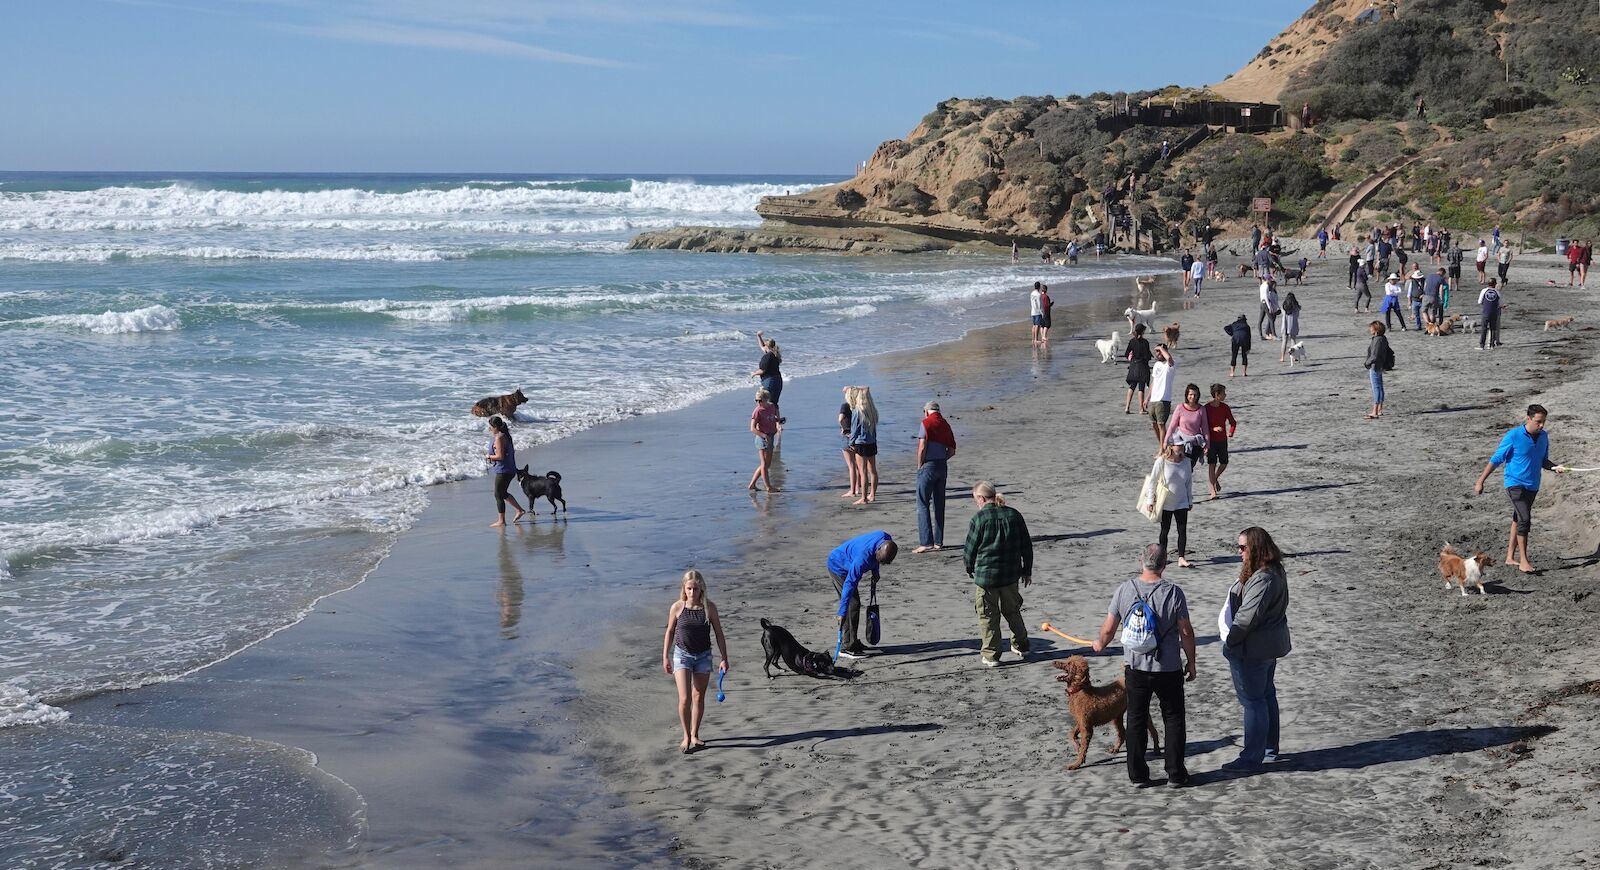 Del Mar, CA / USA - December 26, 2018: People and their dogs enjoy a sunny day at Del Mar dog beach in San Diego County